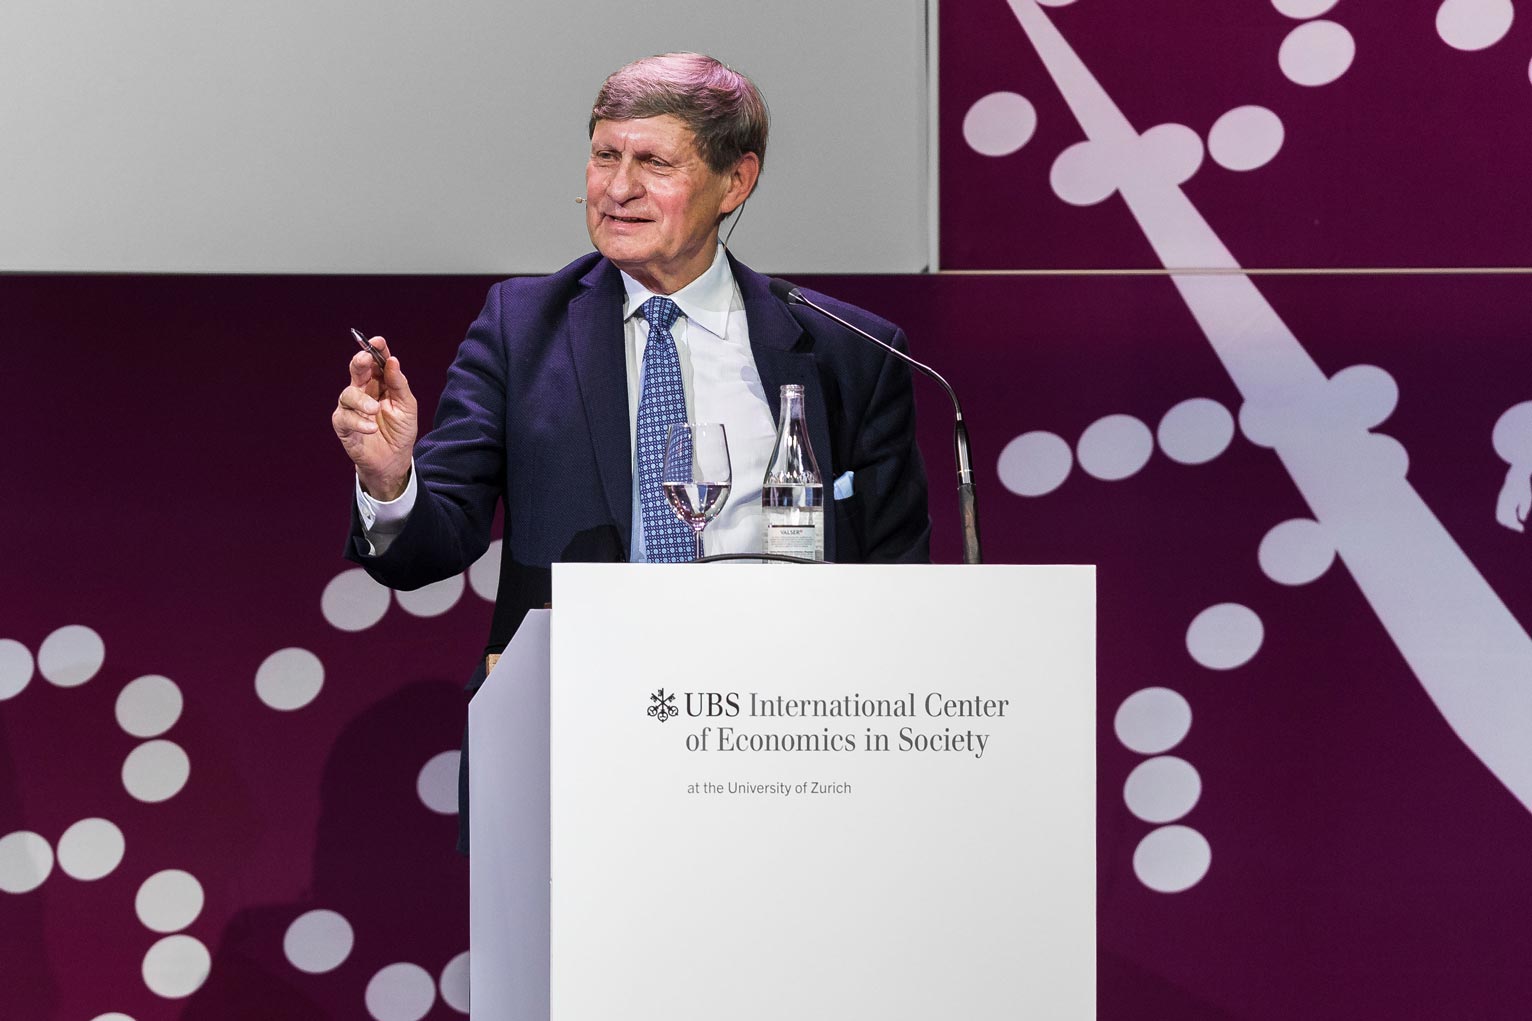 Leszek Balcerowicz (Warsaw School of Economics) presented his assessment of the globalization process since the 1990s.